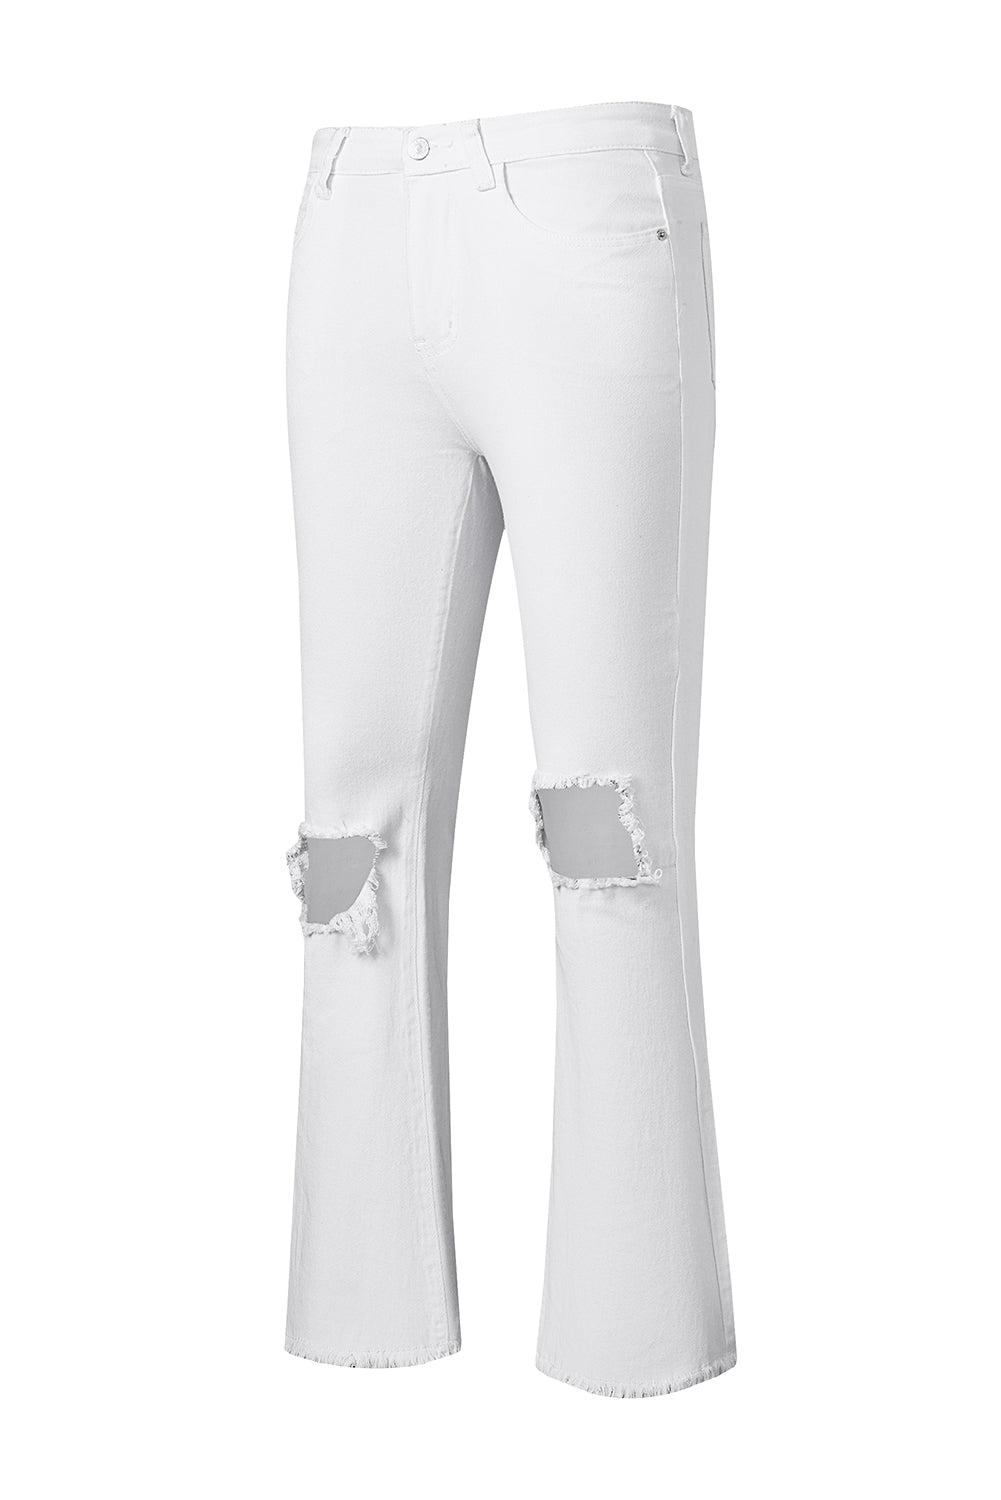 White Distressed Hollow-out Knee Frayed Flare Jeans Jeans JT's Designer Fashion